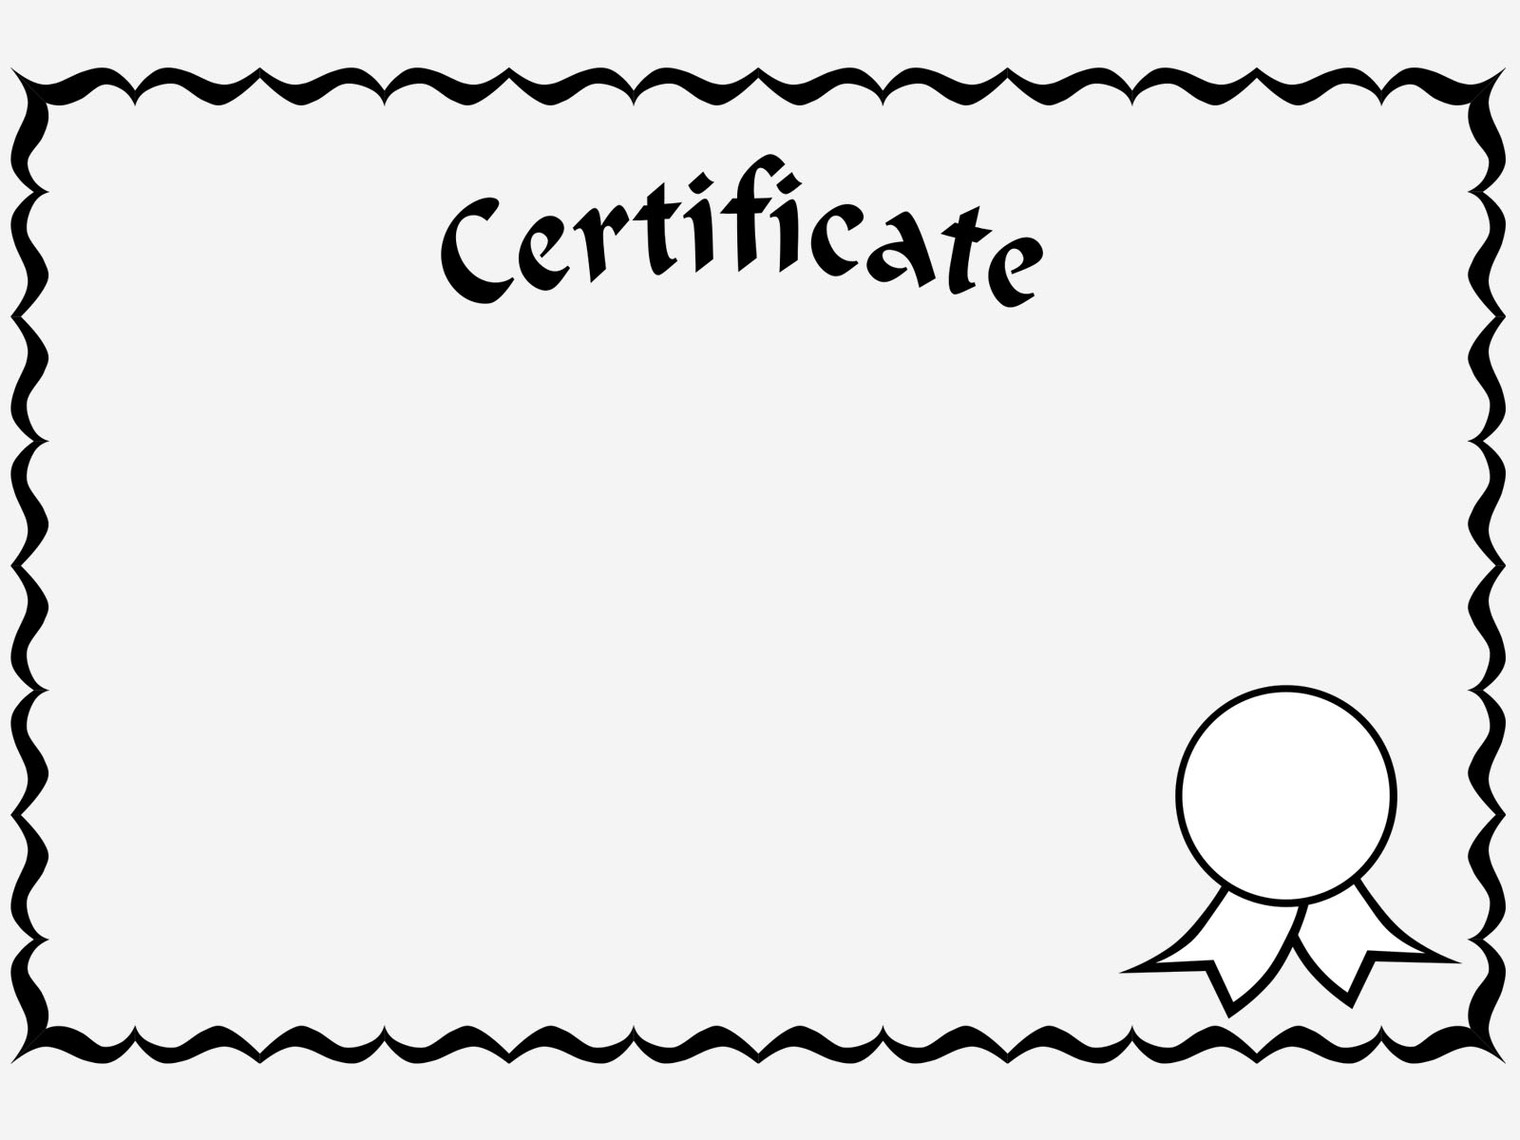 Certificate Background Clipart - Free to use Clip Art Resource